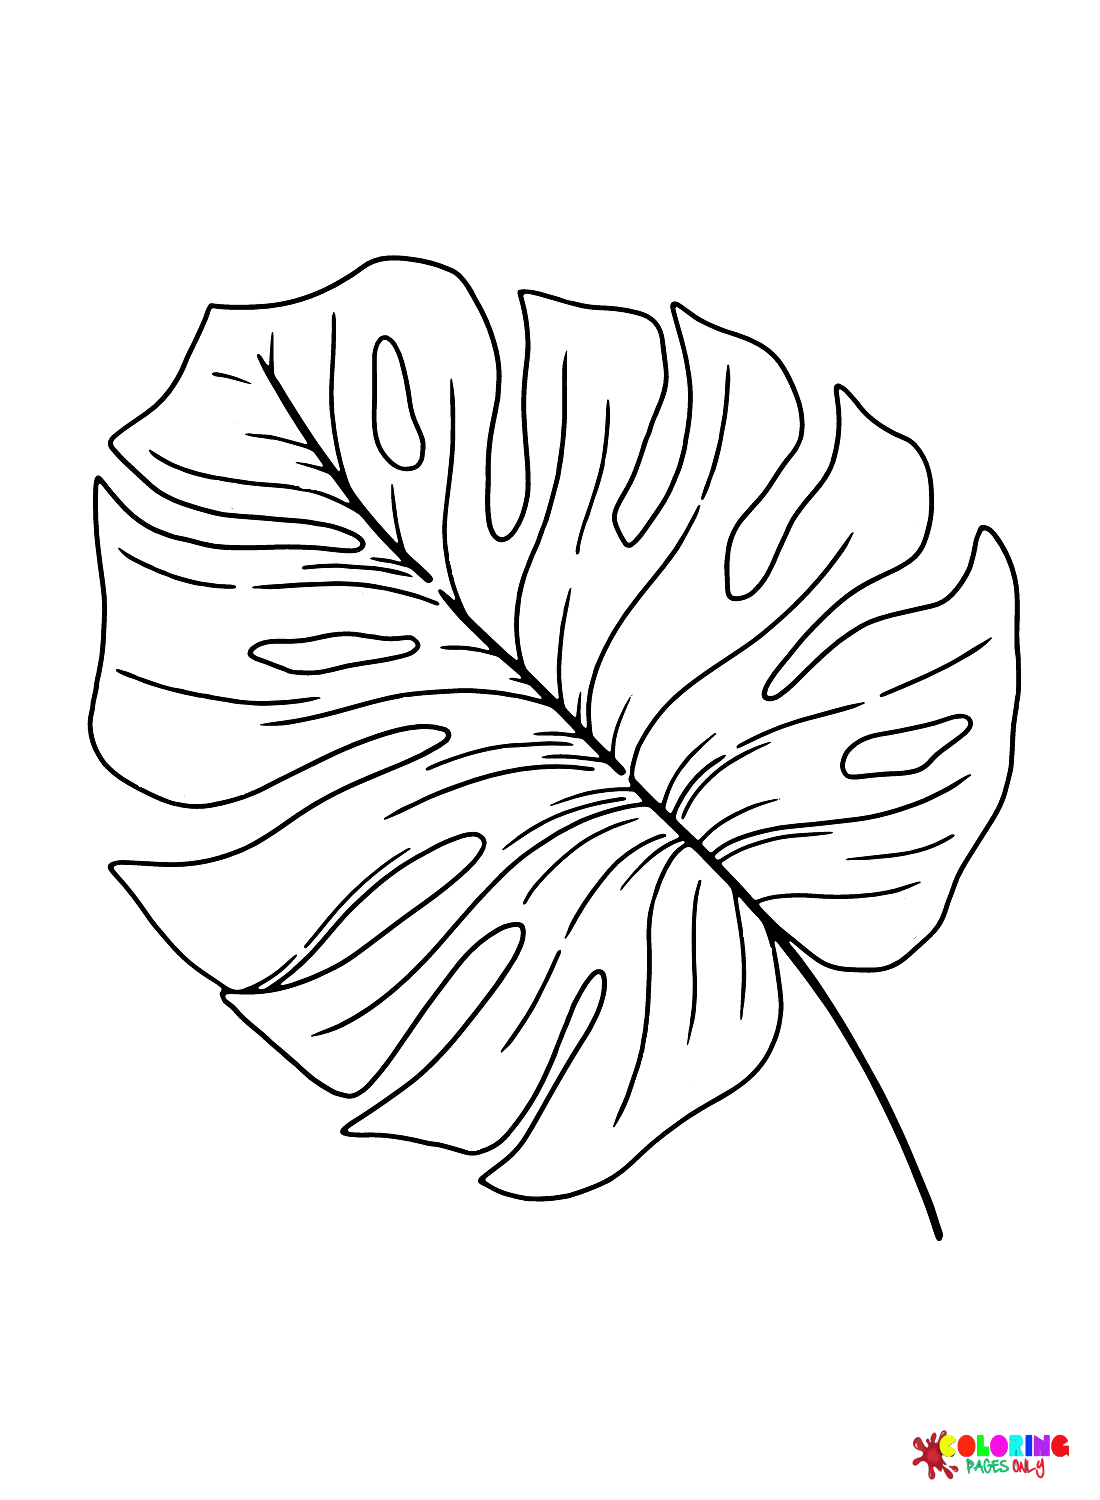 Tropical Leaf Coloring Pages